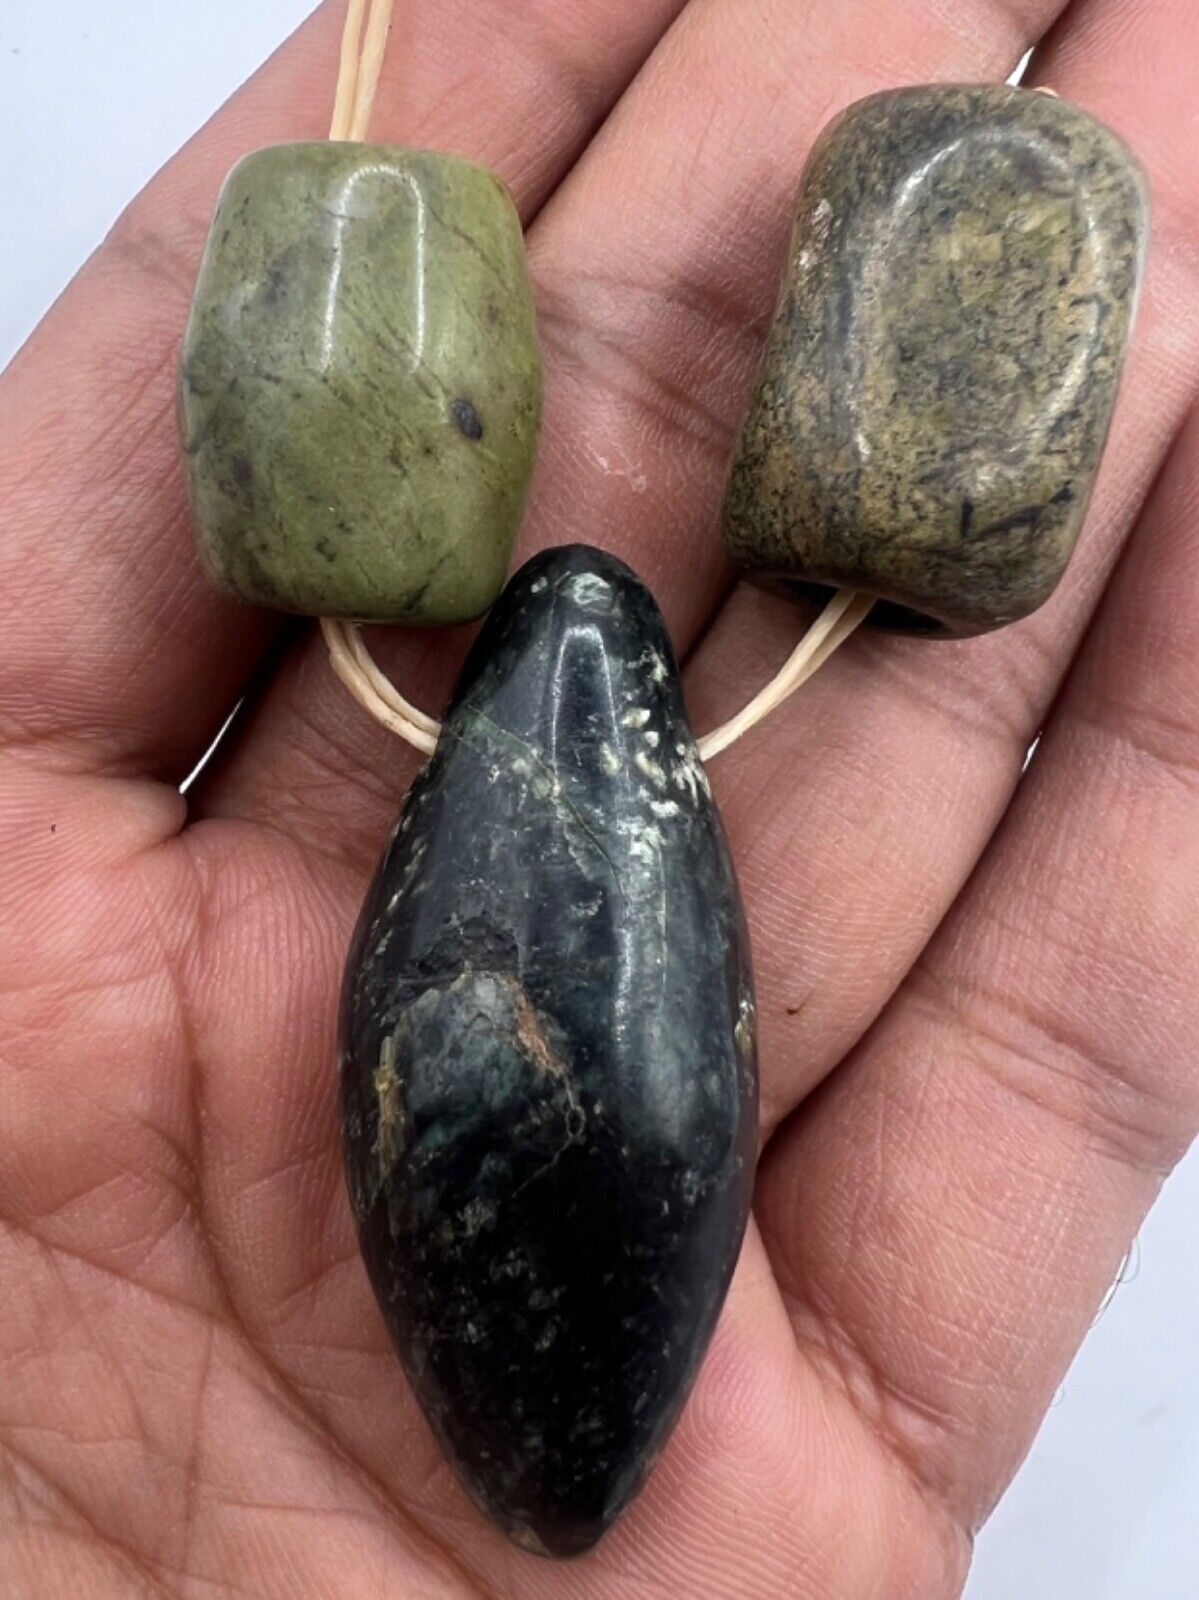 Rare Authentic Bactria Beads Collection 3 Nephrite Jade Stone Beads From Afghani